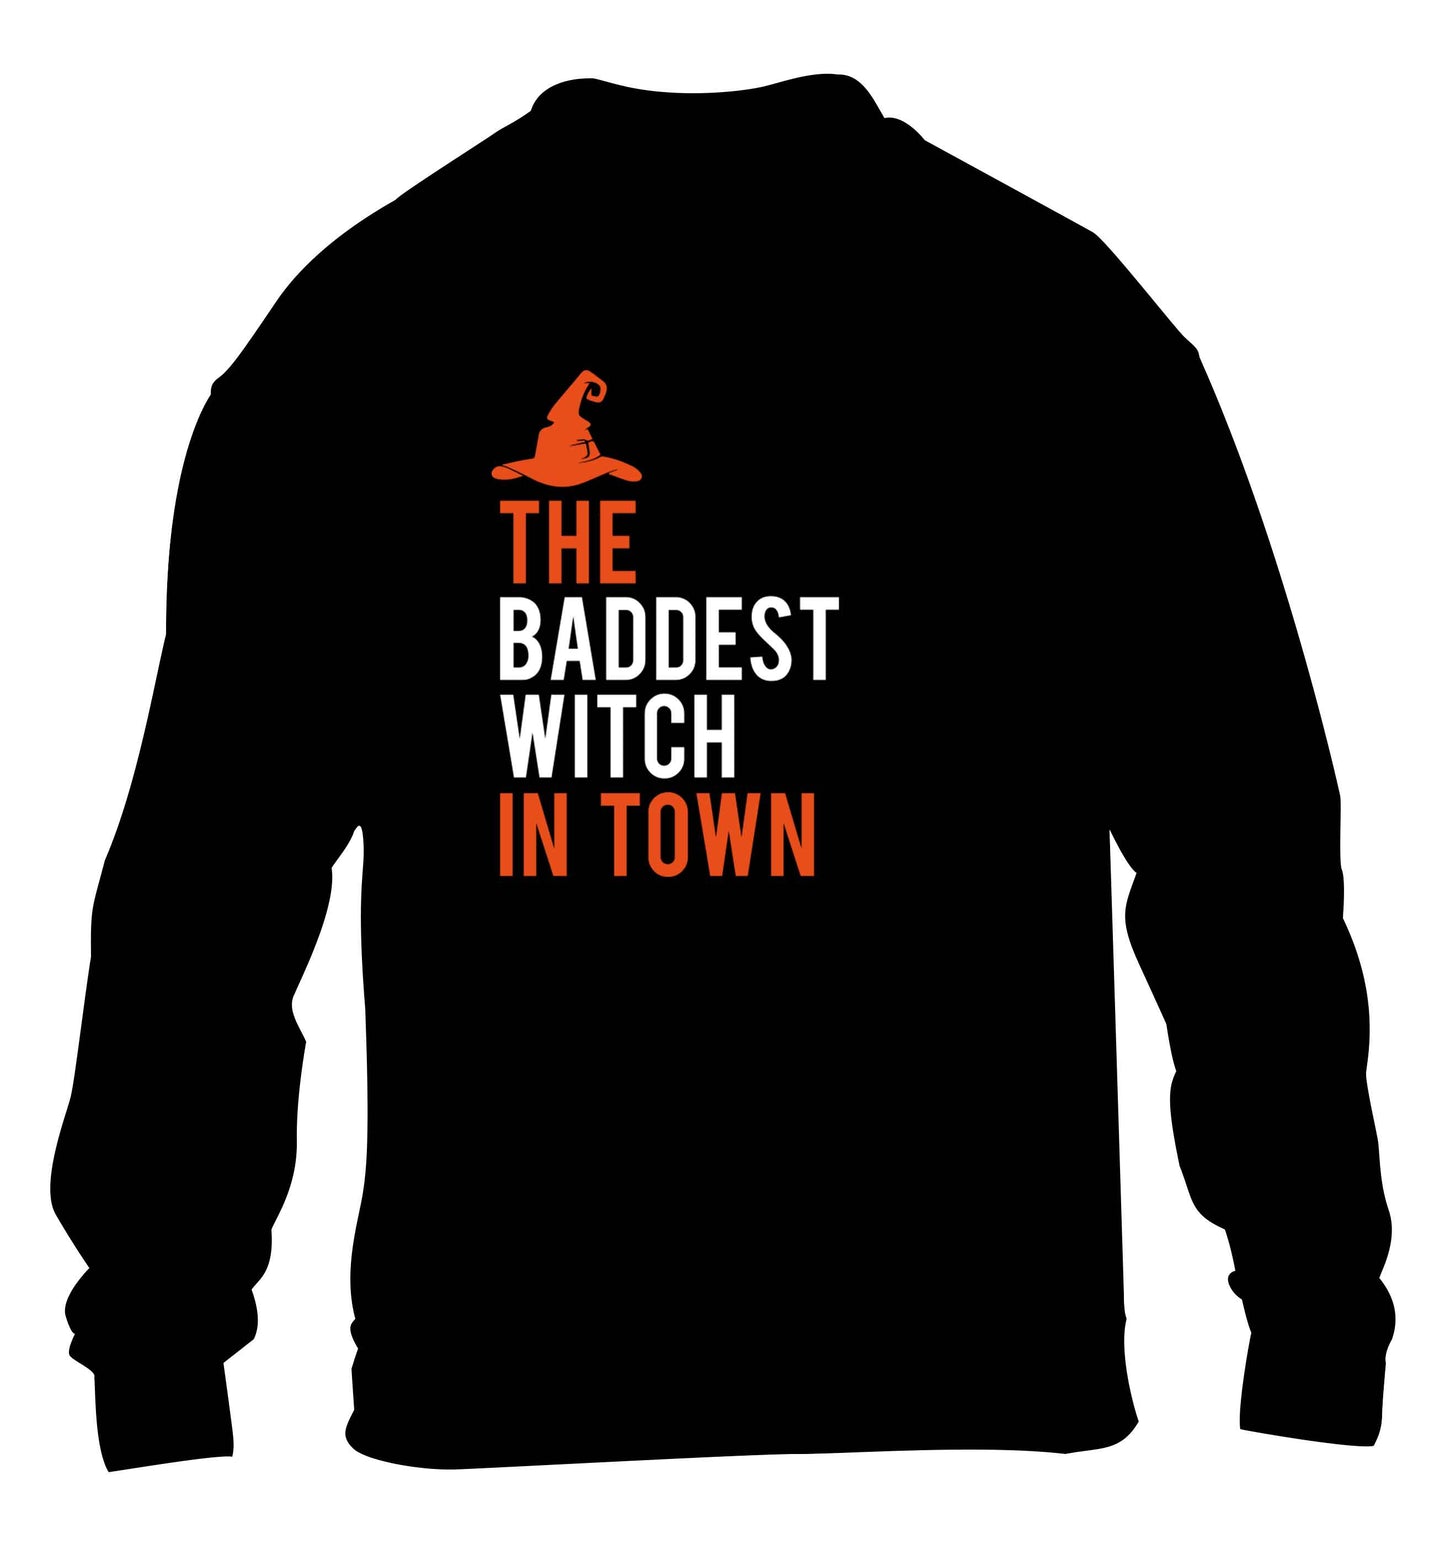 Badest witch in town children's black sweater 12-13 Years